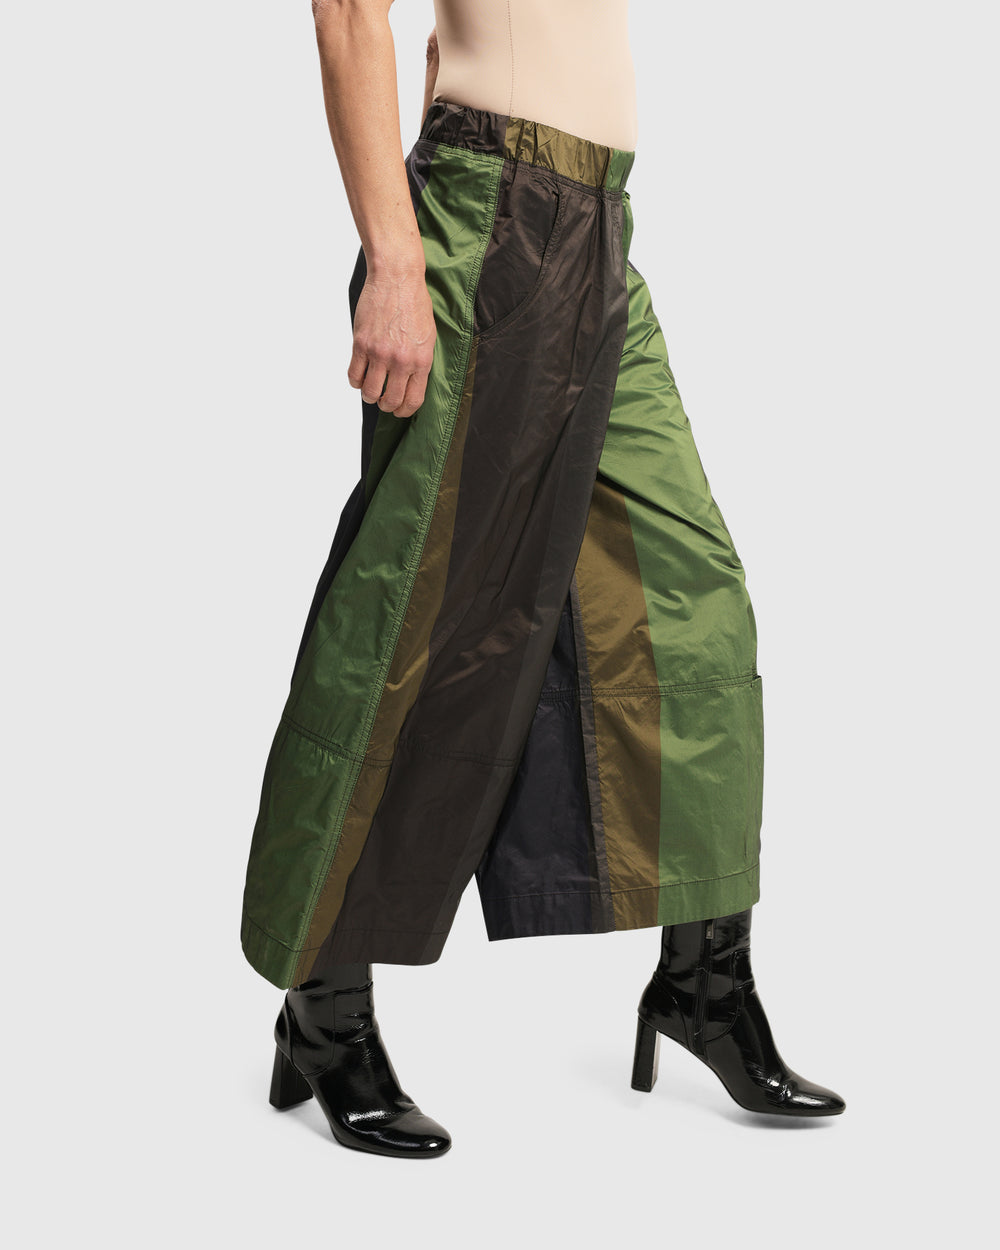 A woman stylishly dons the woven ALEMBIKA Alfresco Market Pants, Forest, featuring an elastic waistband and a captivating forest colored palette.